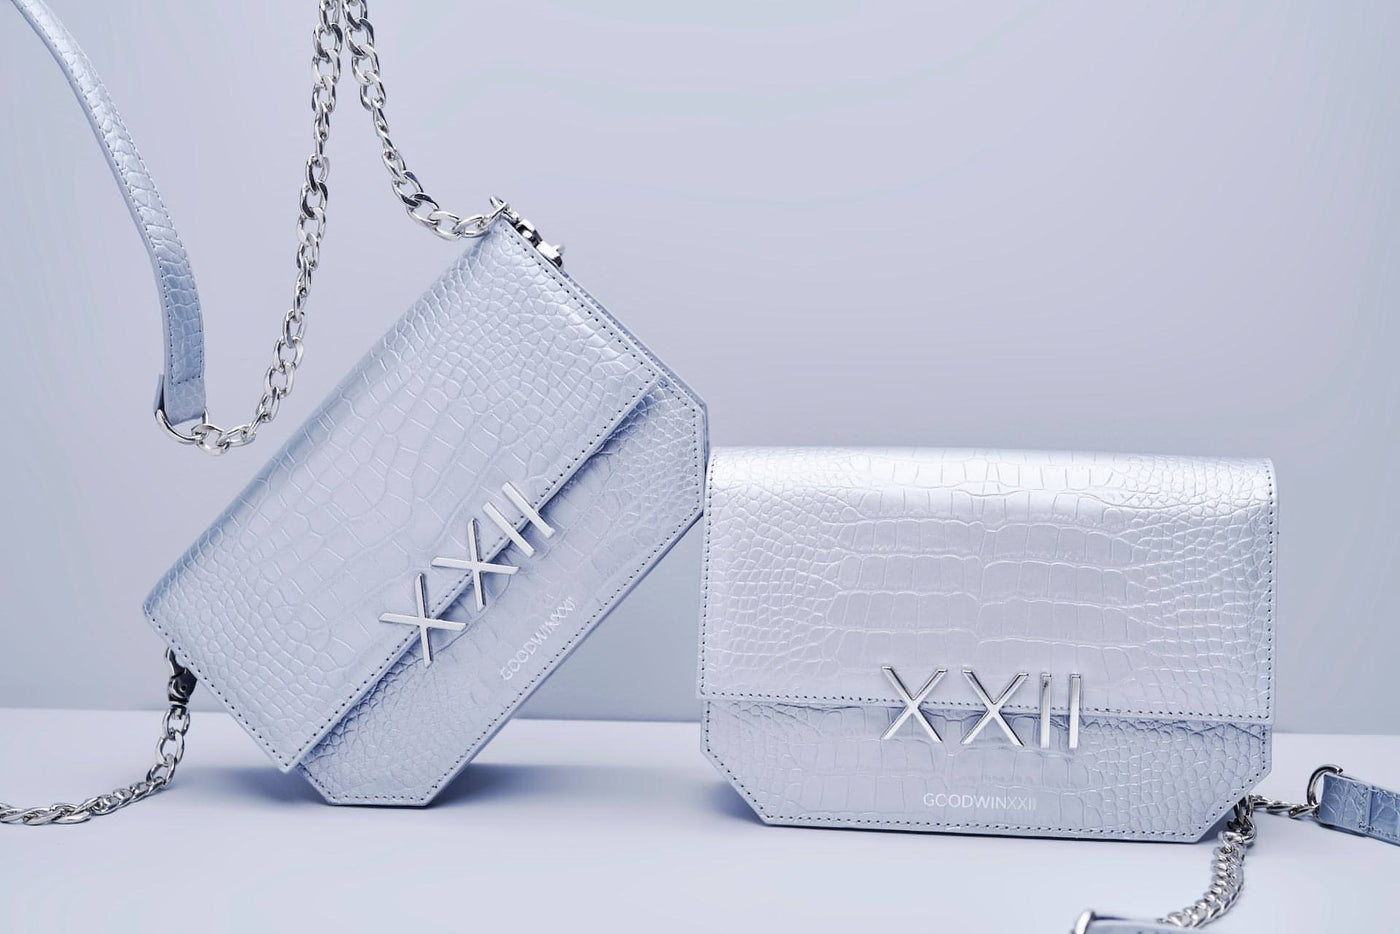 Goodwinxxii silver croc embossed leather crossbody with silver hardware